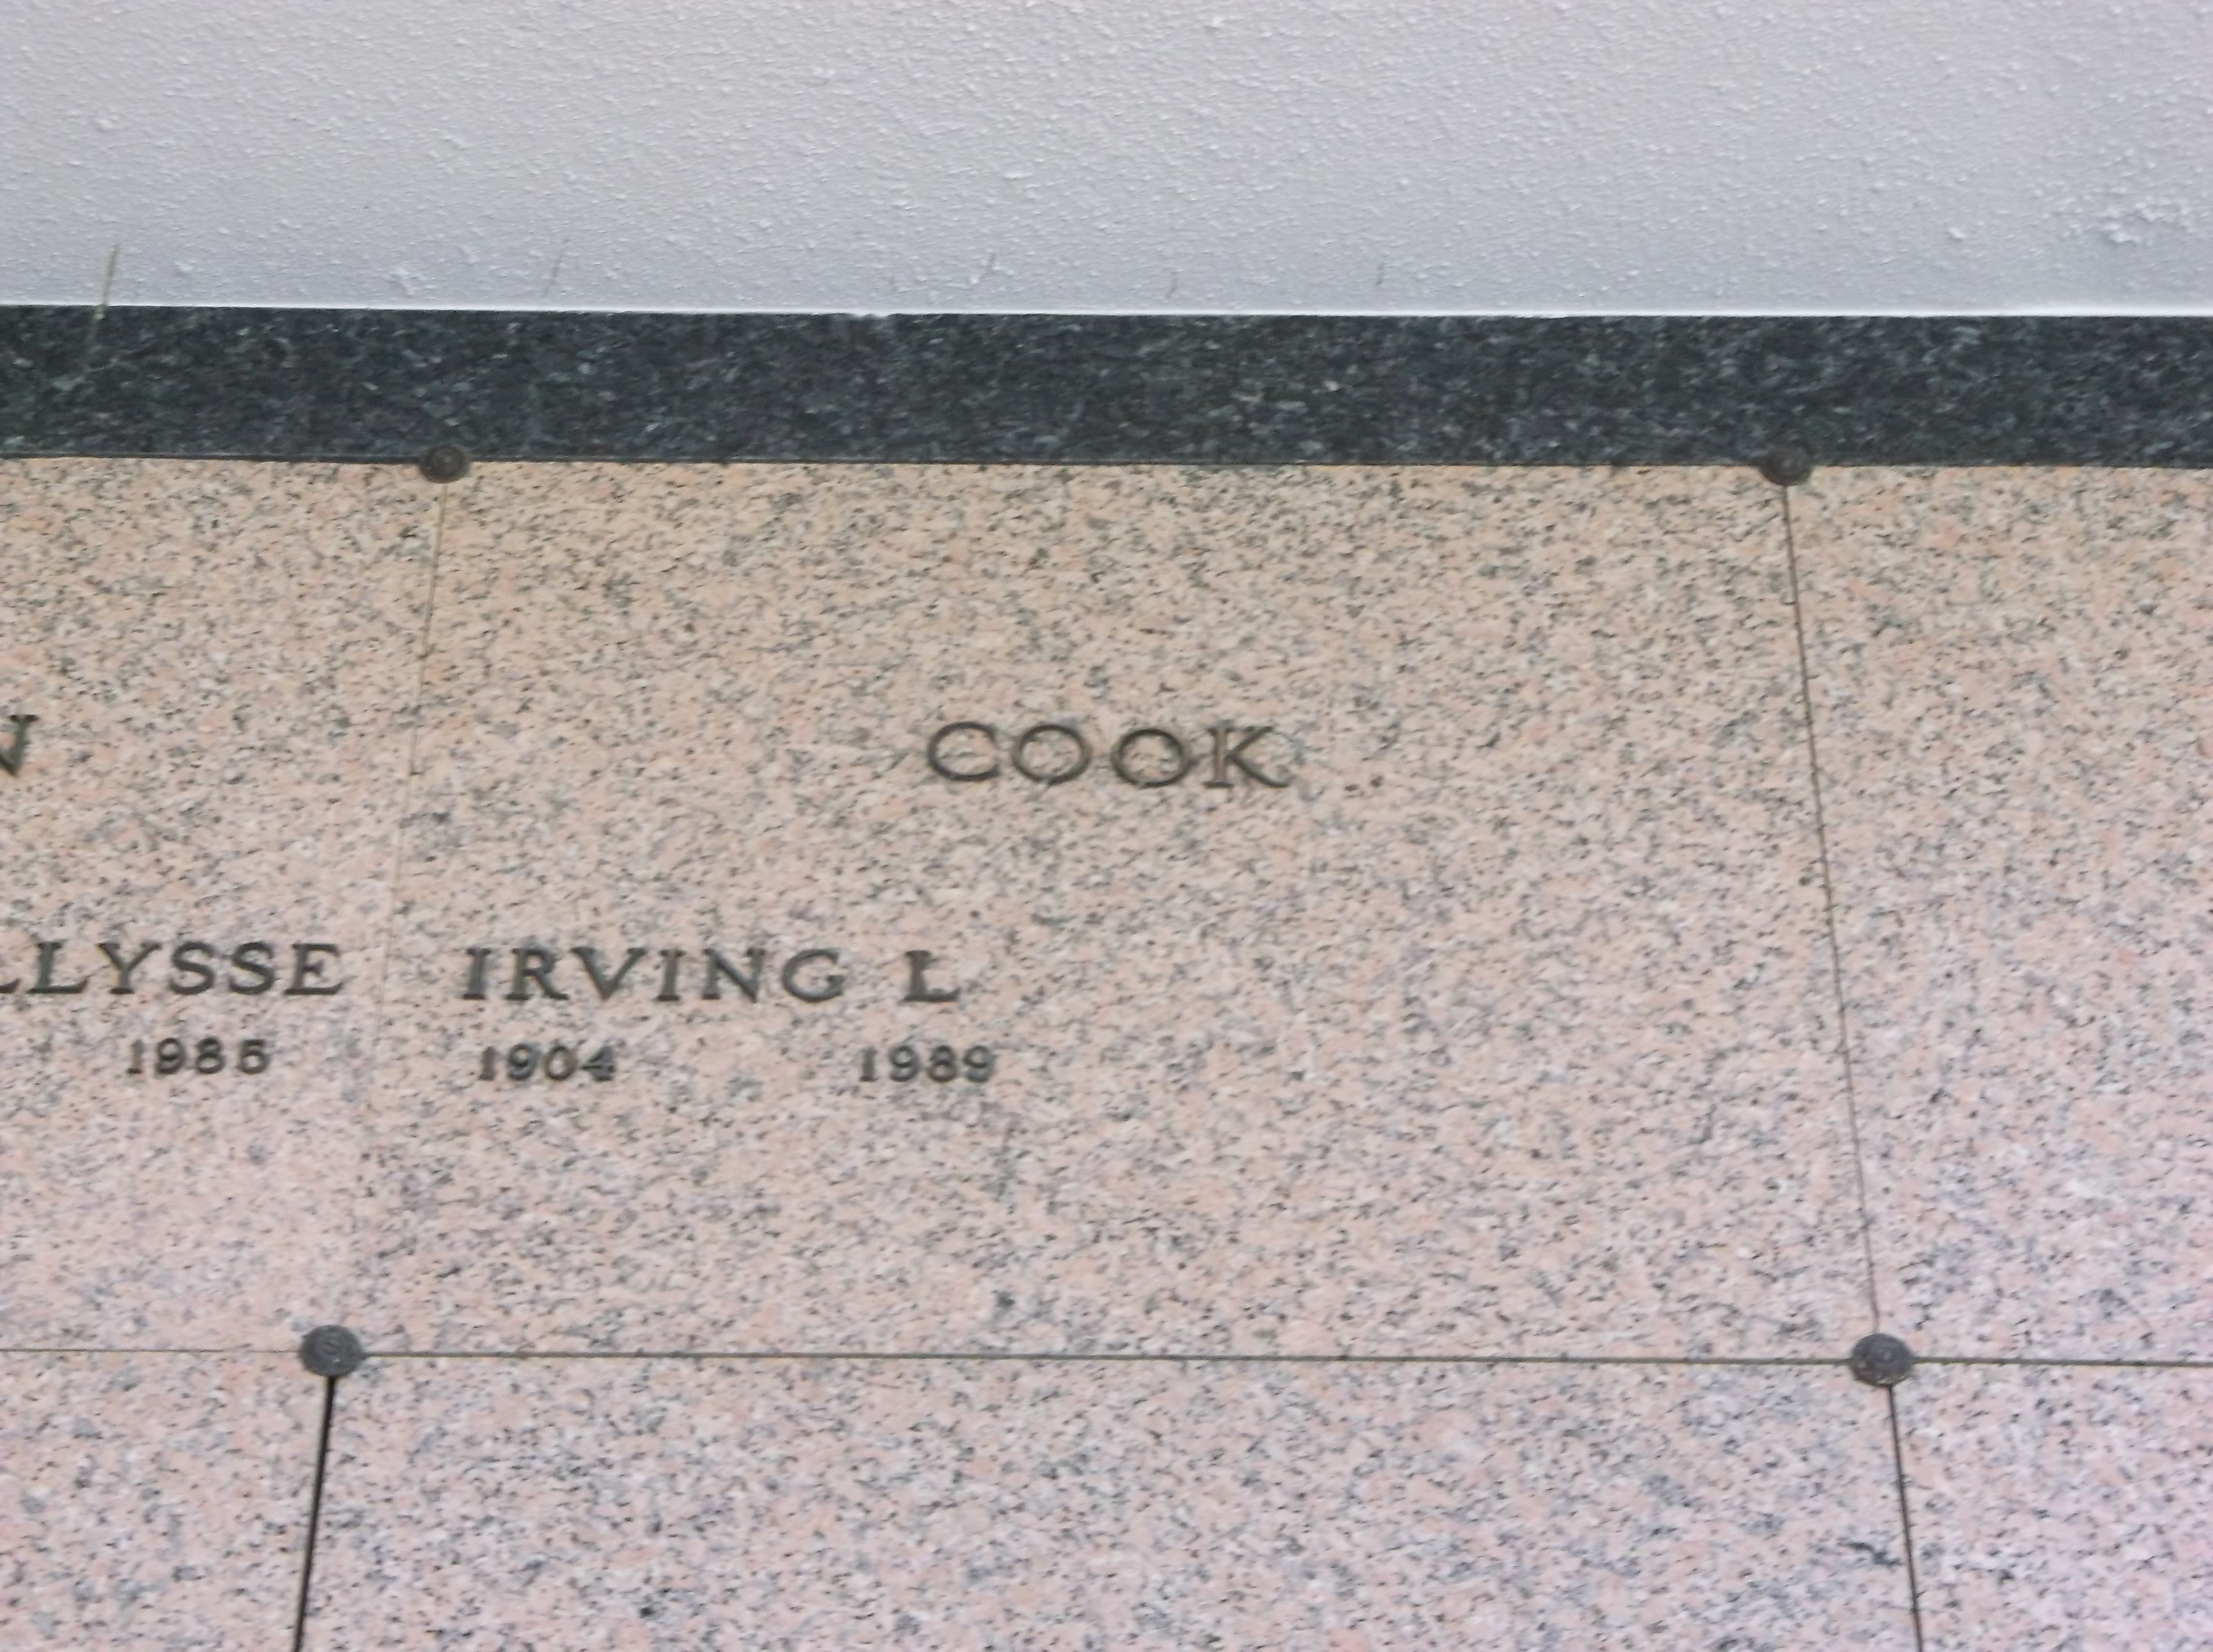 Irving L Cook